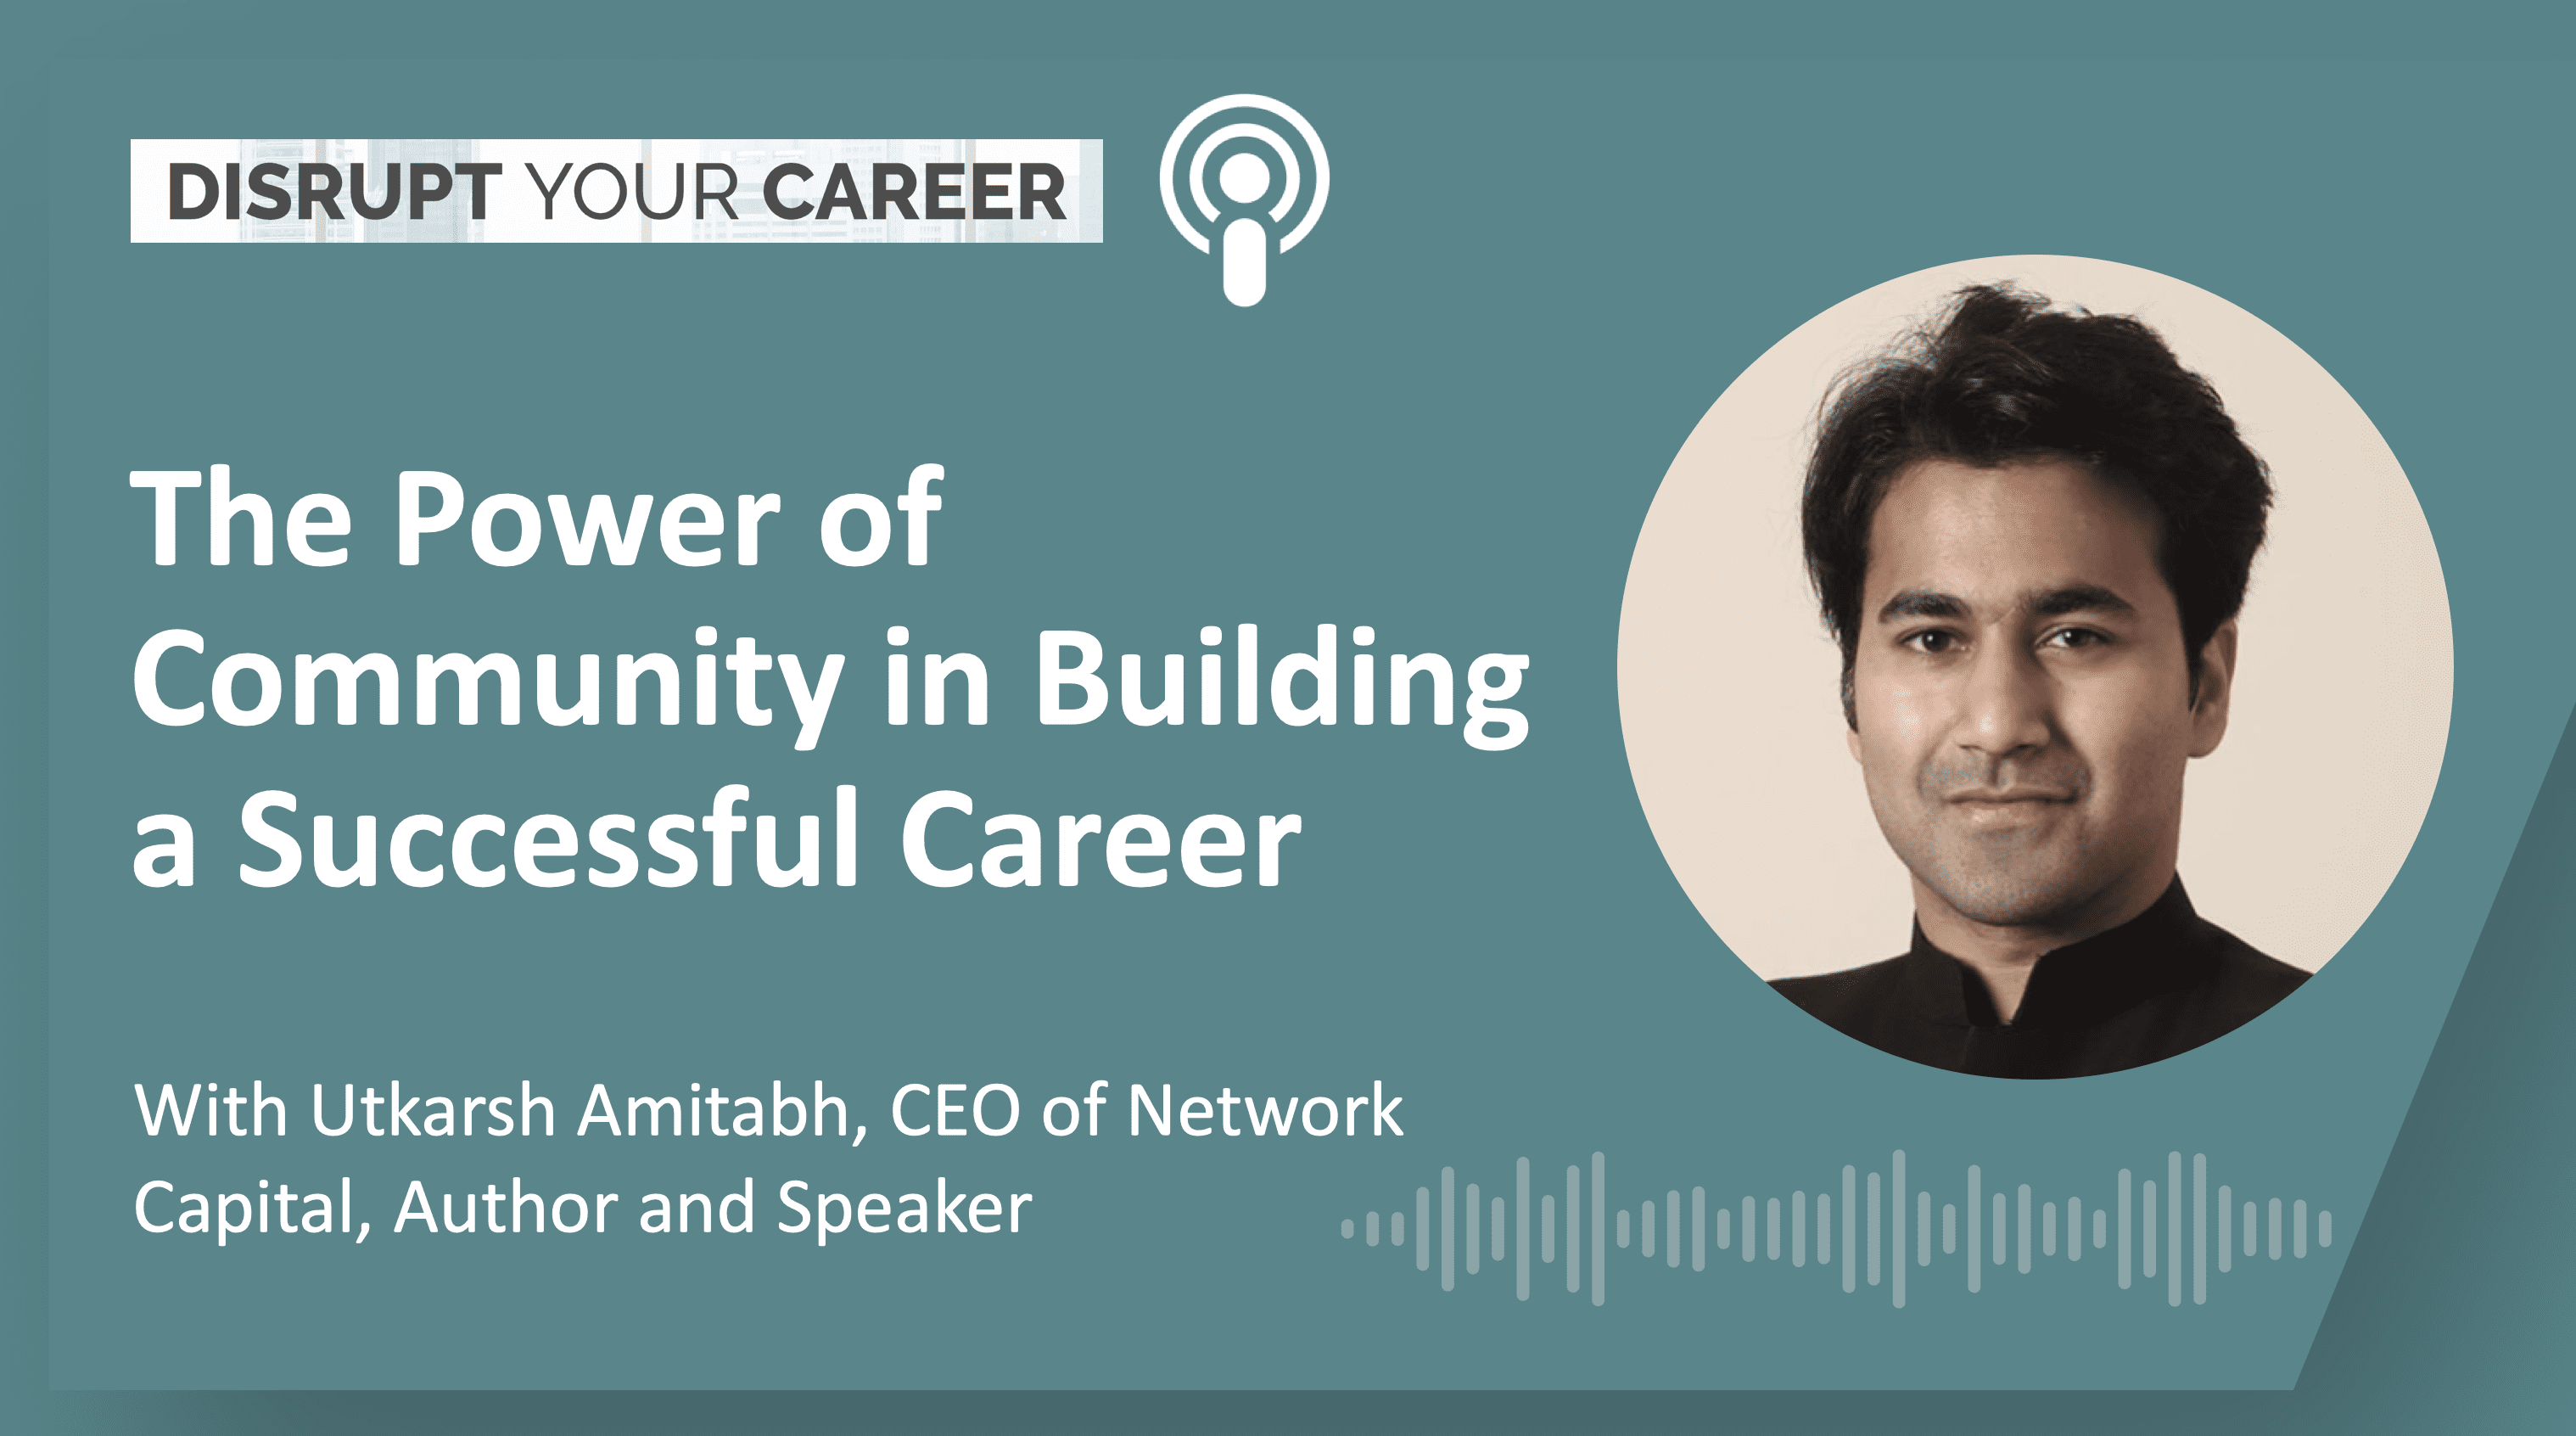 The Power of Community in Building a Successful Career